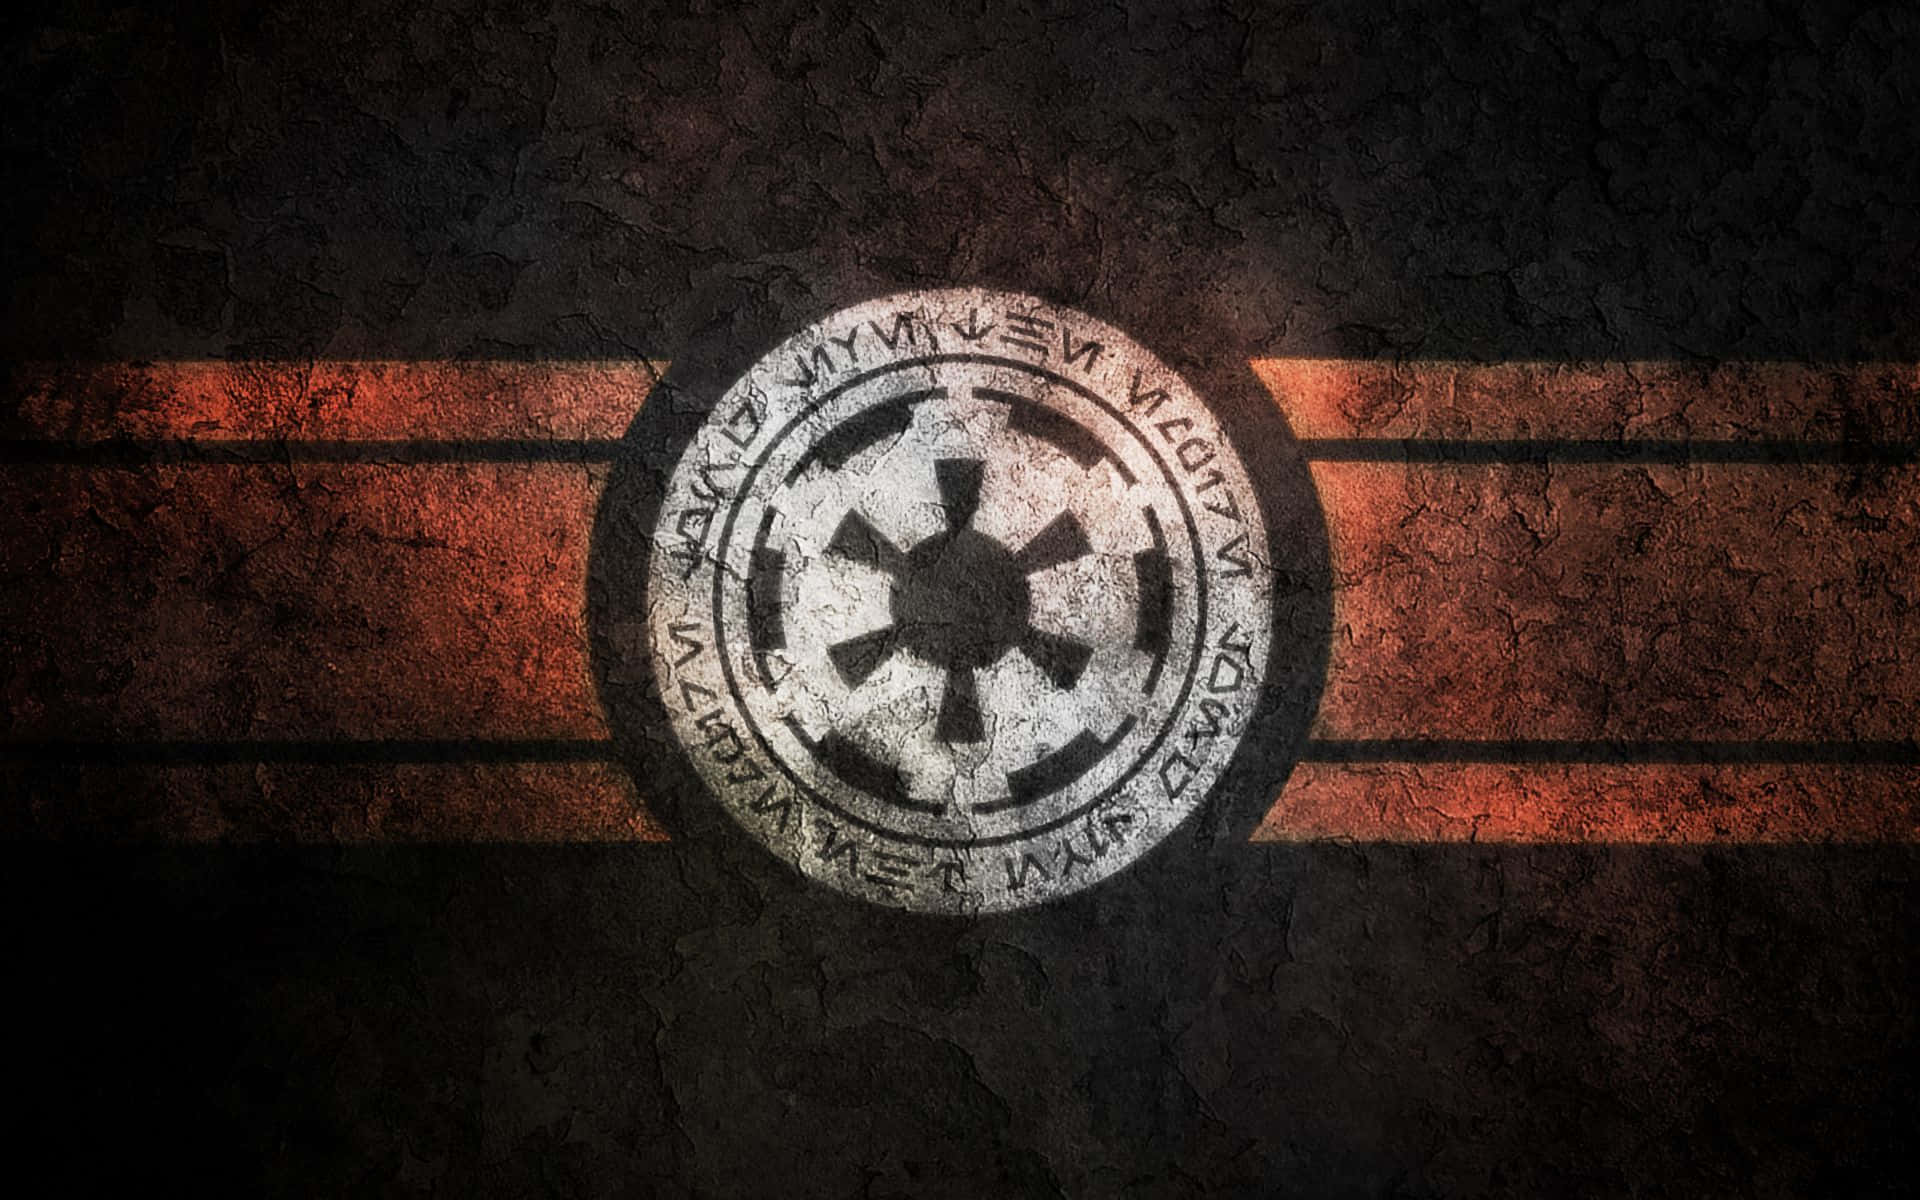 The Mighty Empire of Star Wars Wallpaper